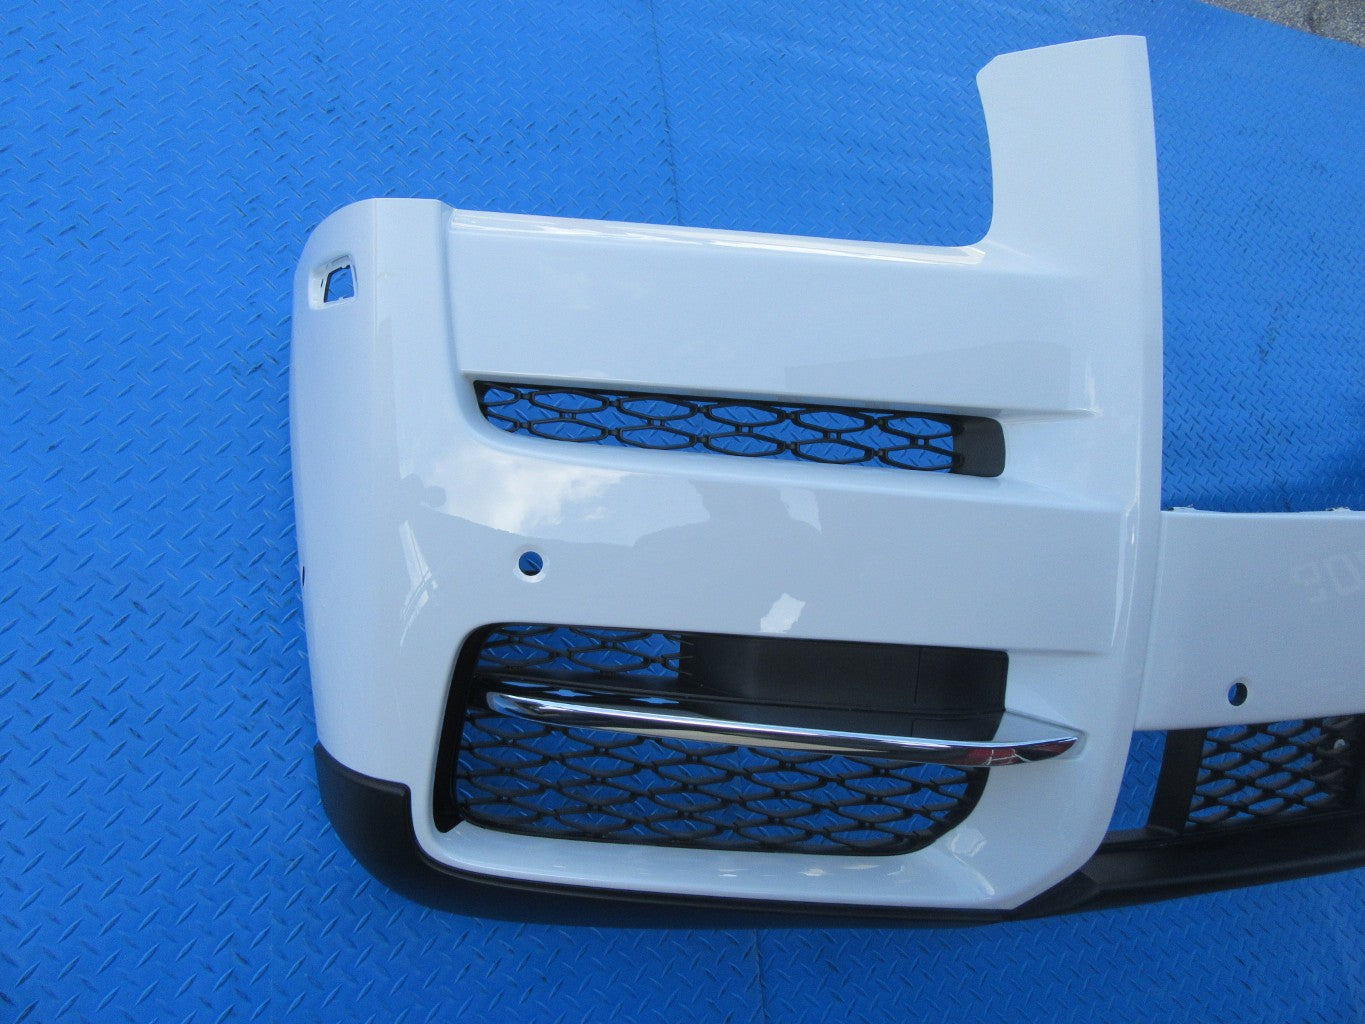 Rolls Royce Cullinan front bumper cover with grilles #2566